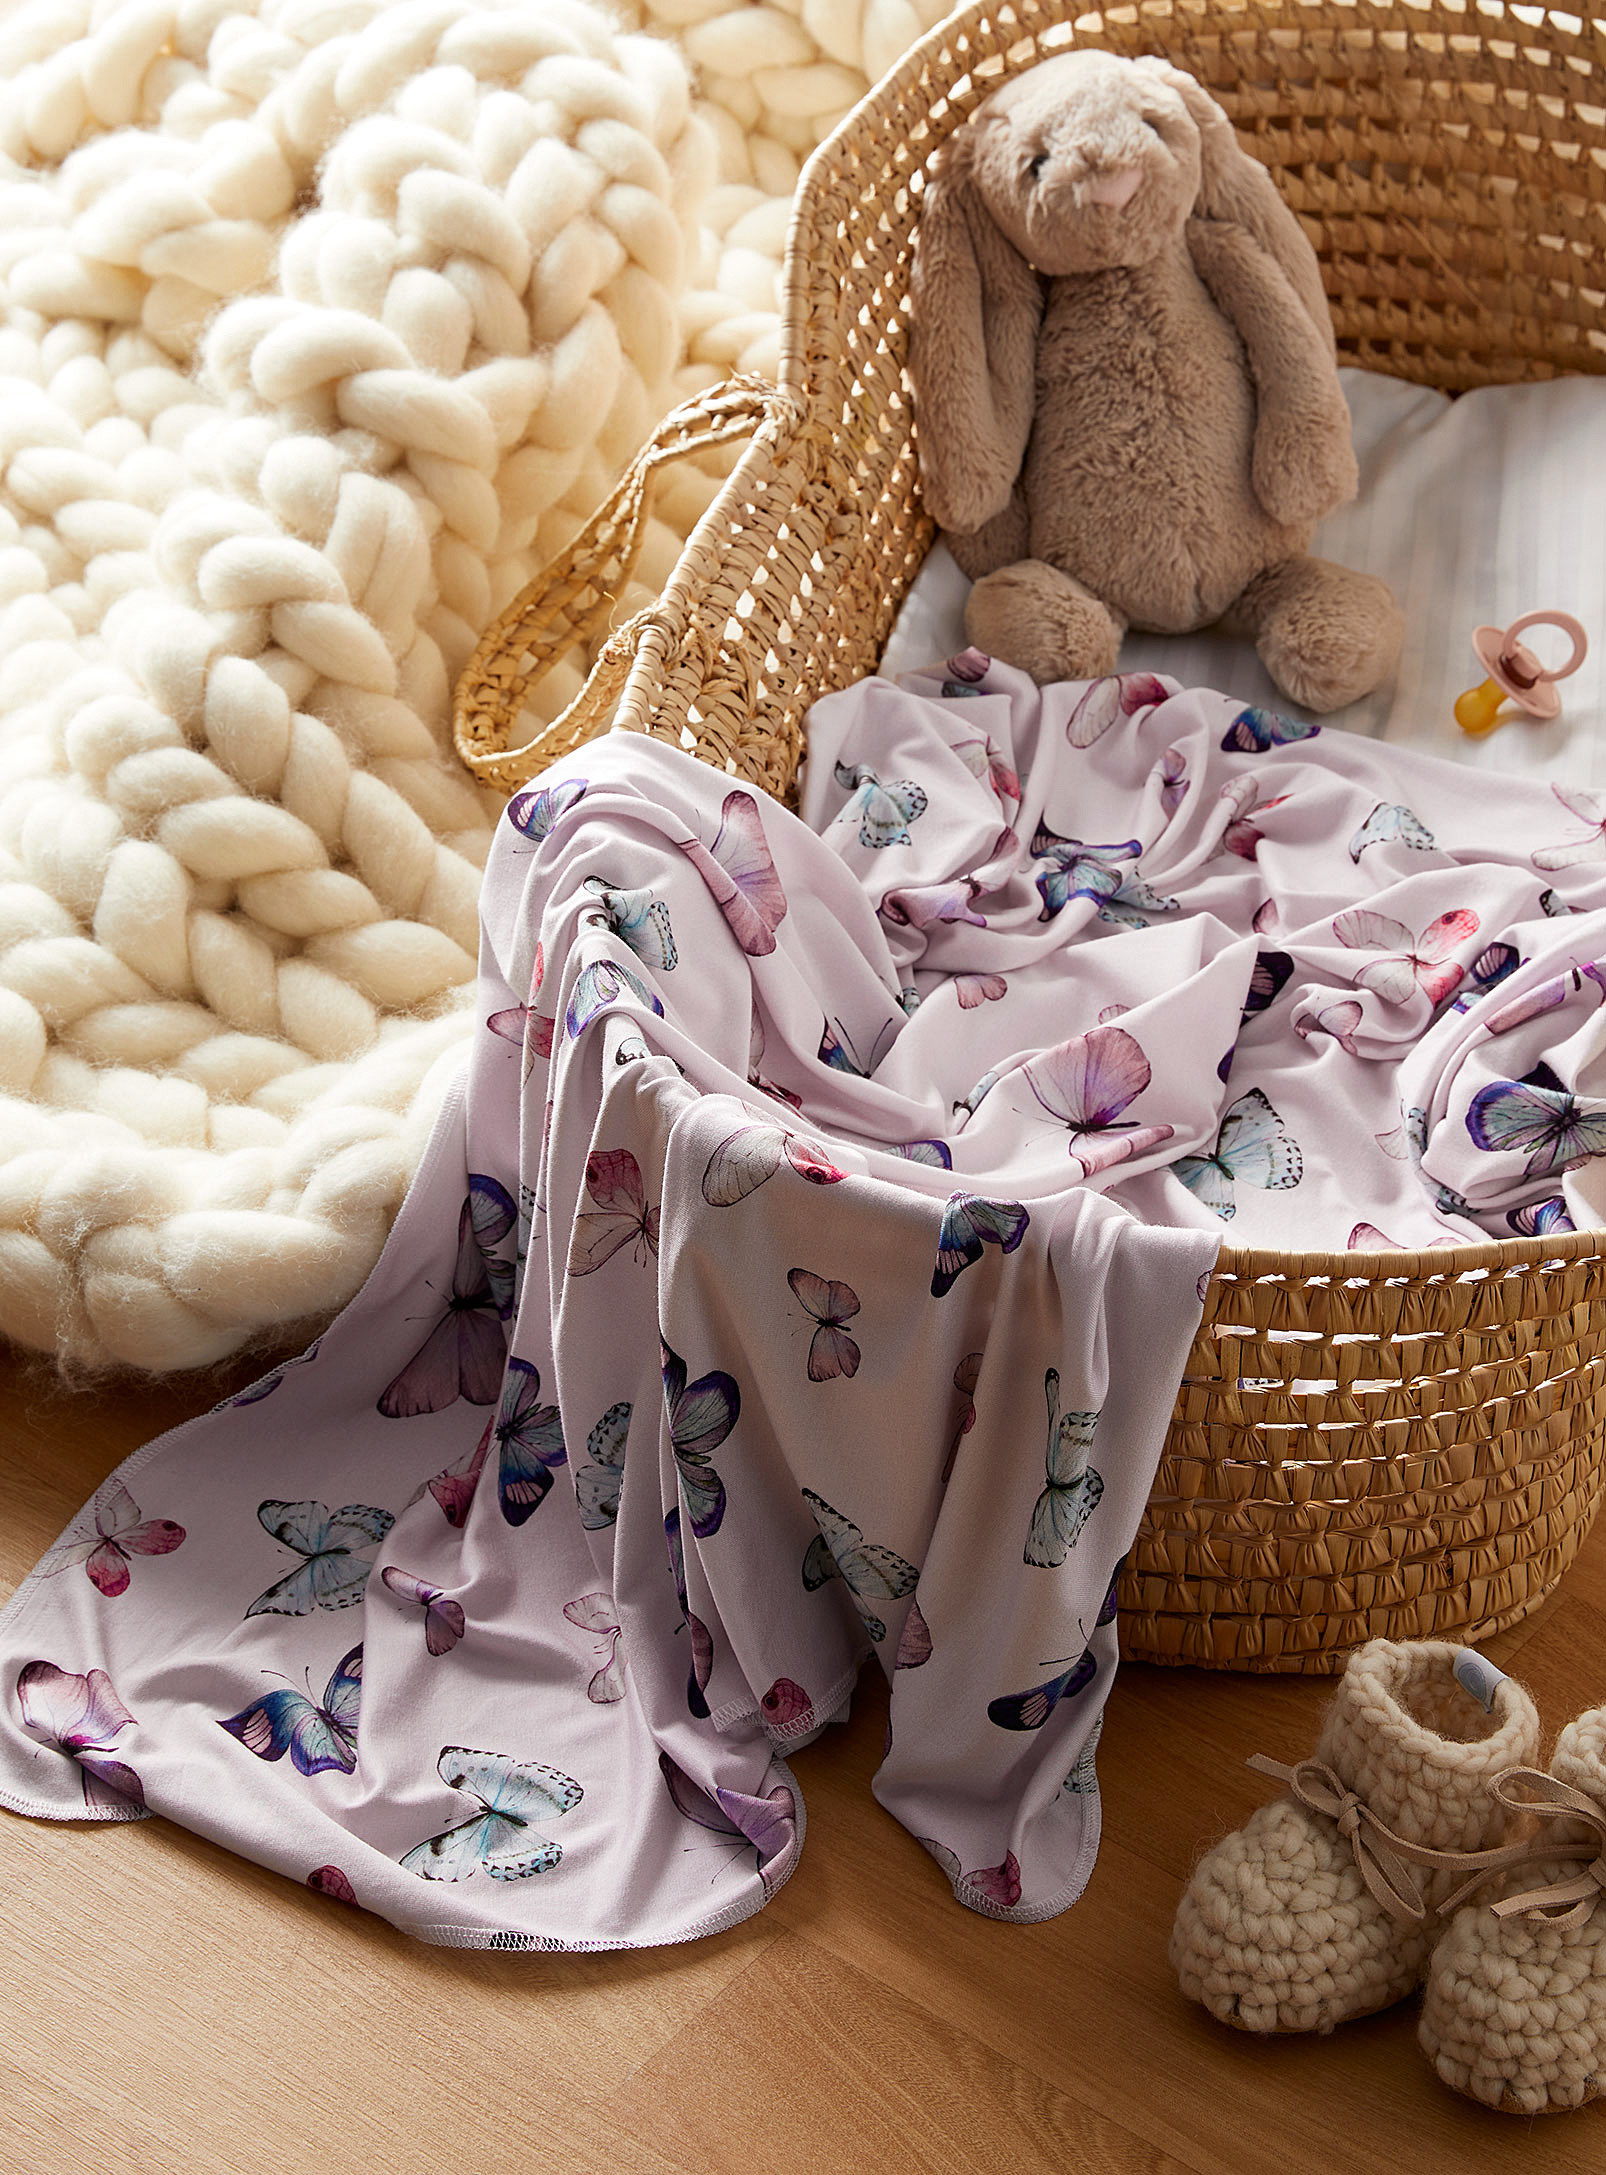 A blanket with a butterfly print lying in a woven straw bassinet